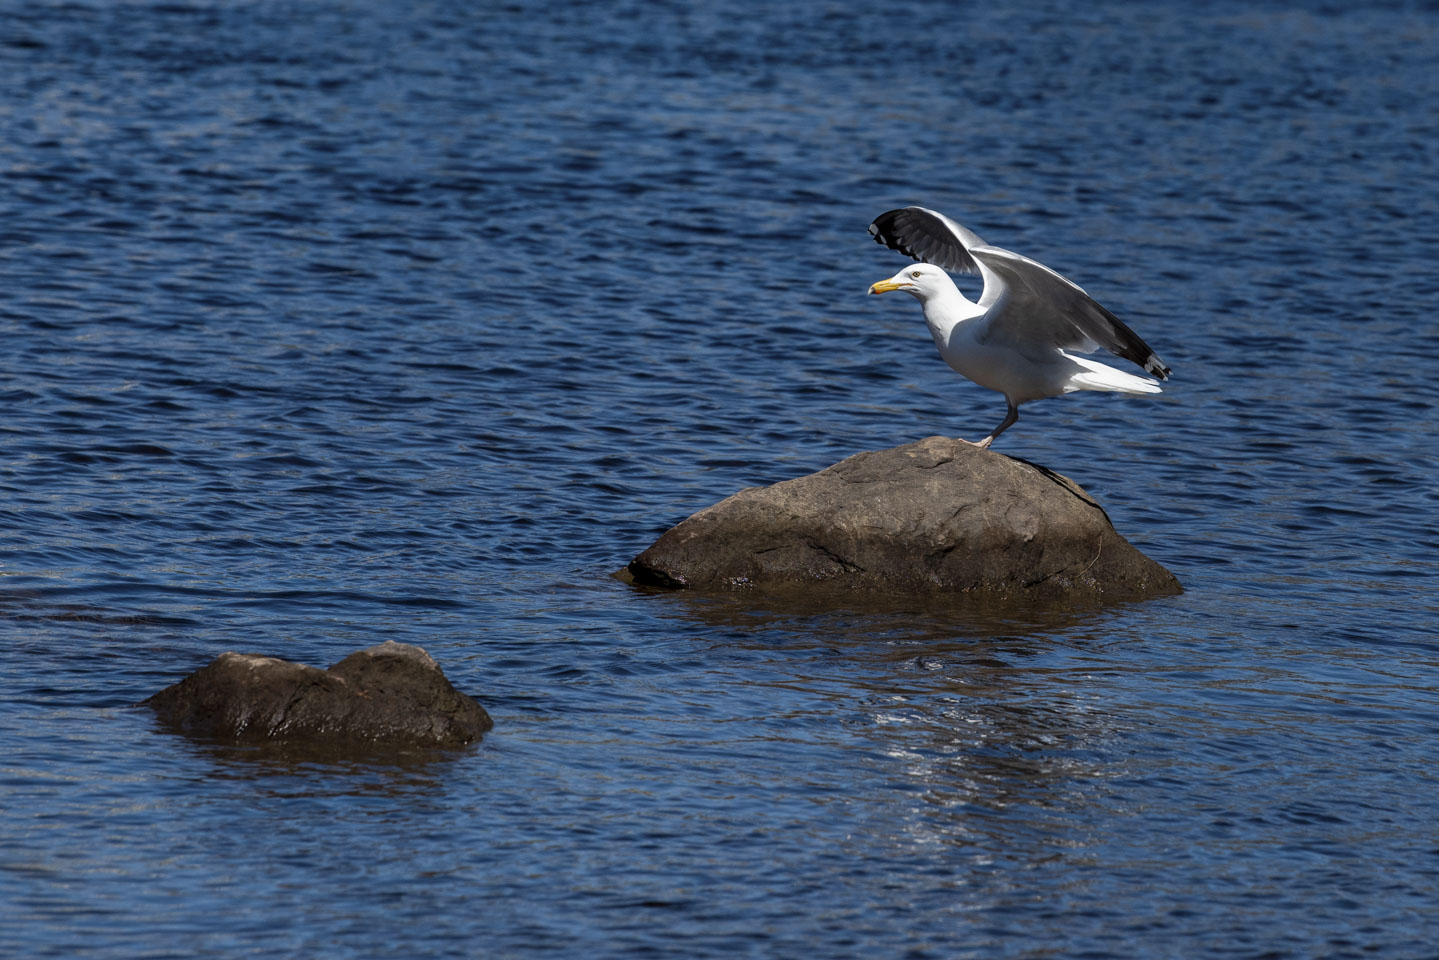 A herring gull on a rock with spread wings